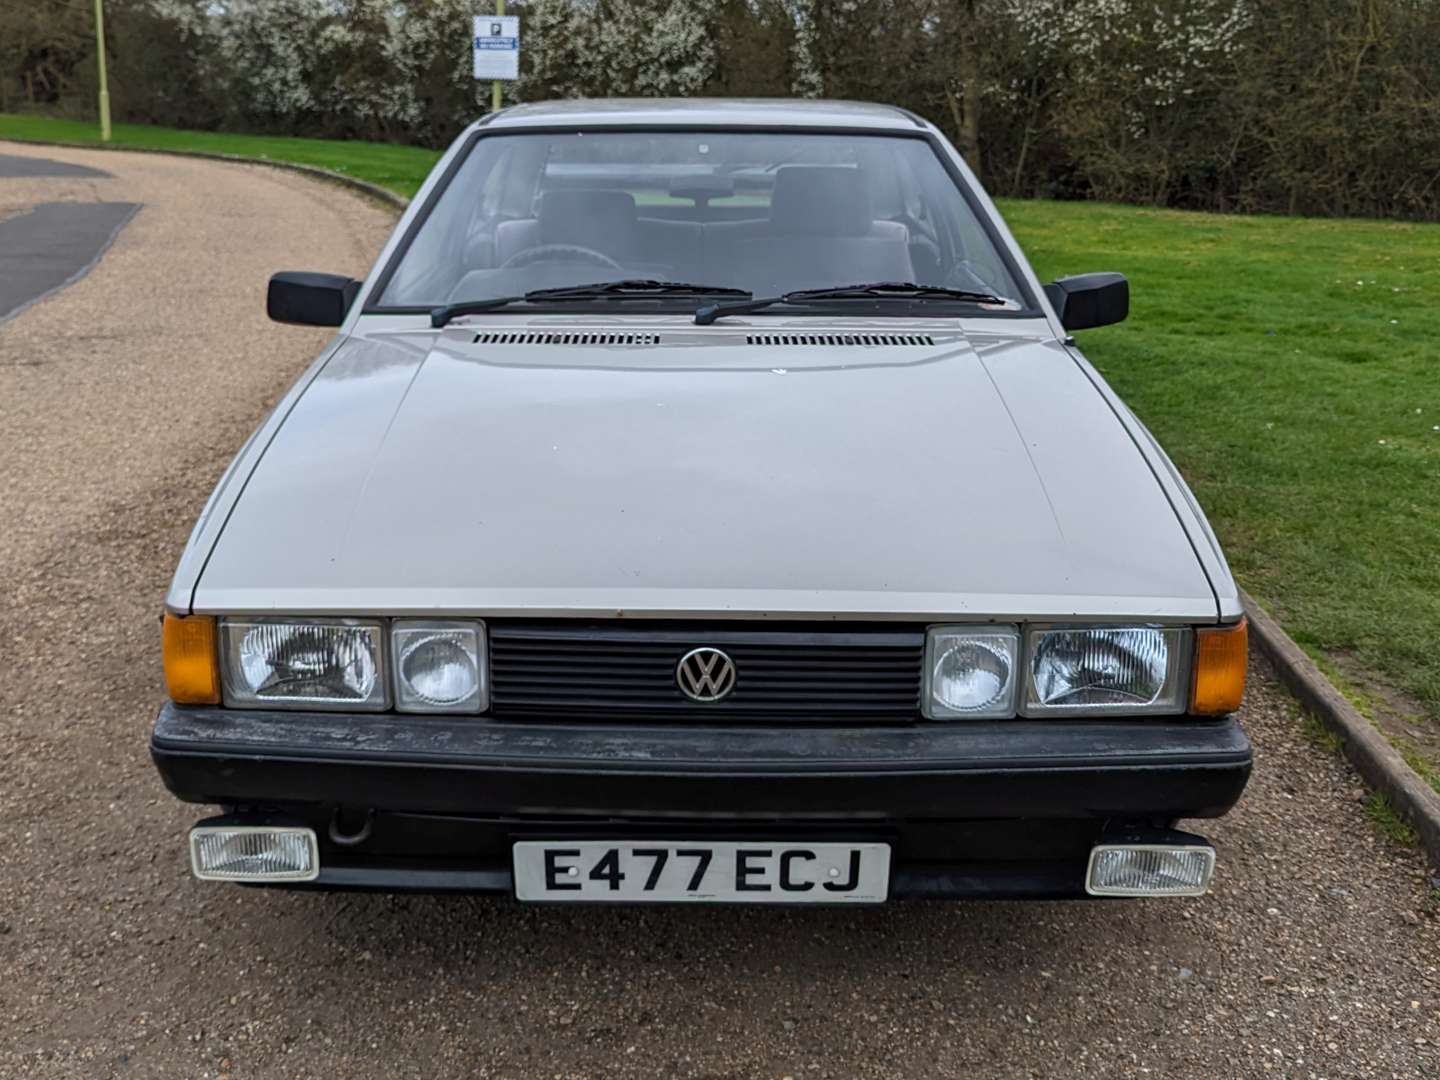 1987 VW SCIROCCO GT - Image 2 of 28